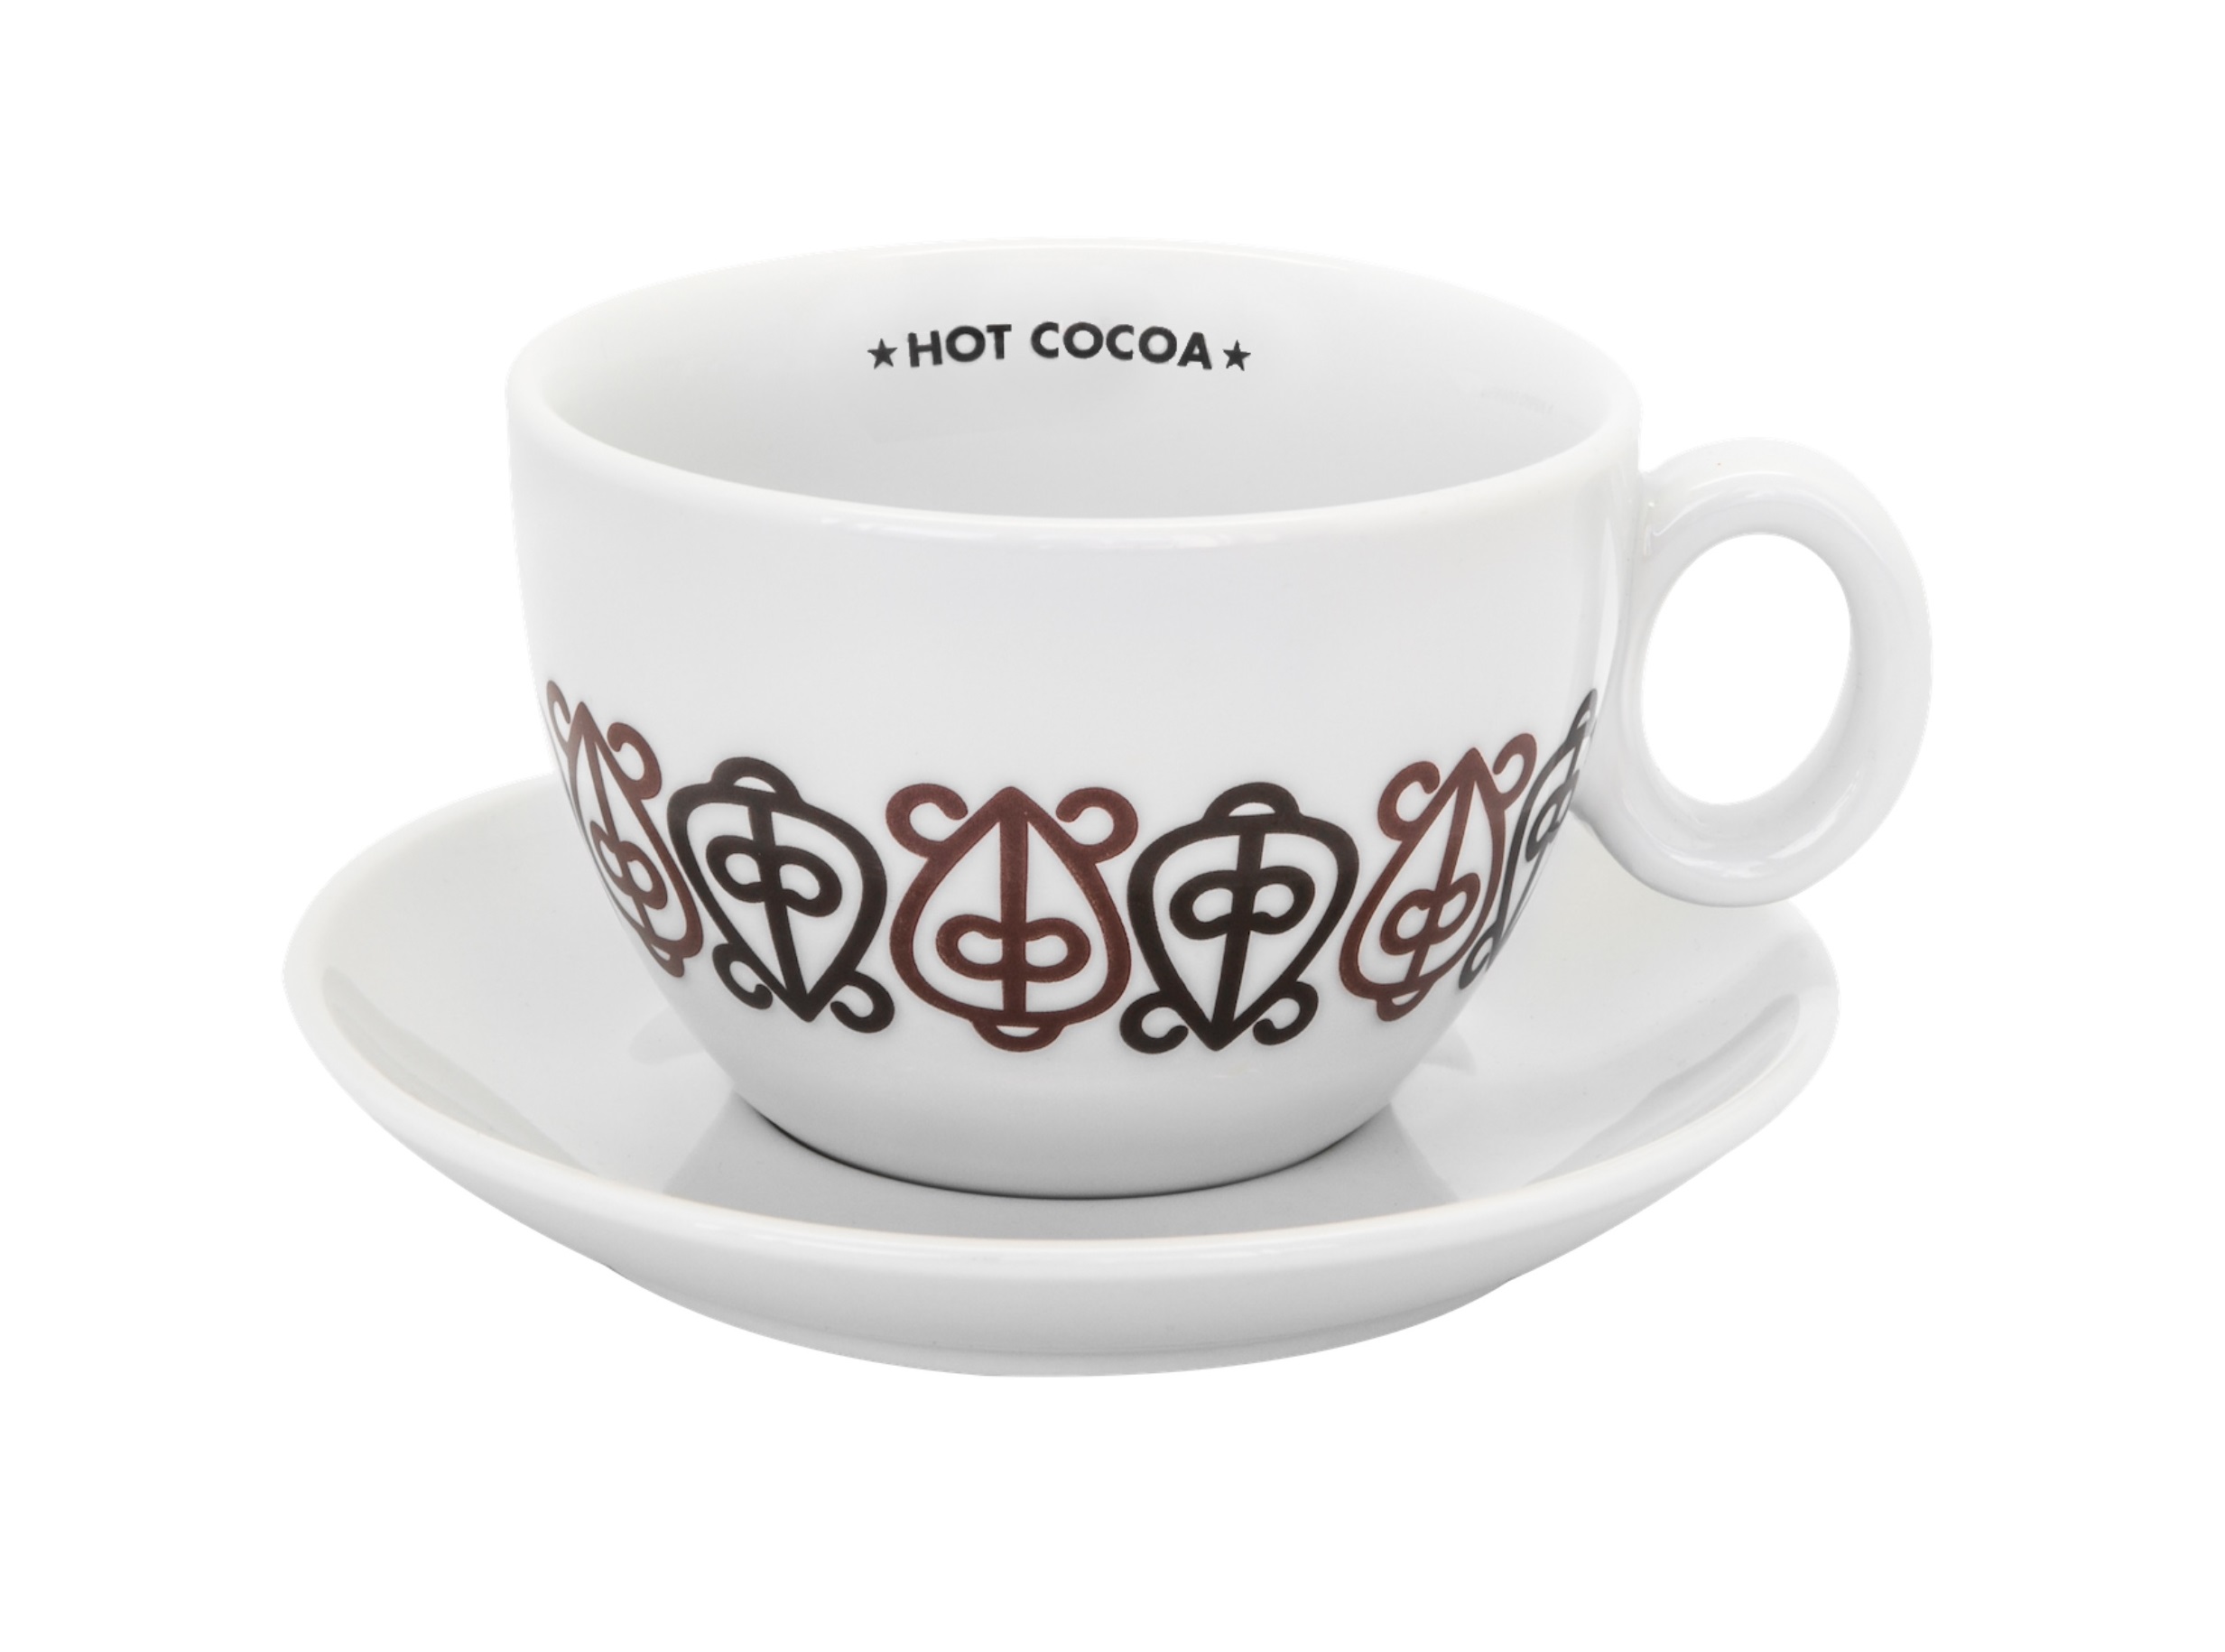 Hot Cocoa Tasse - XL, 2nd edition